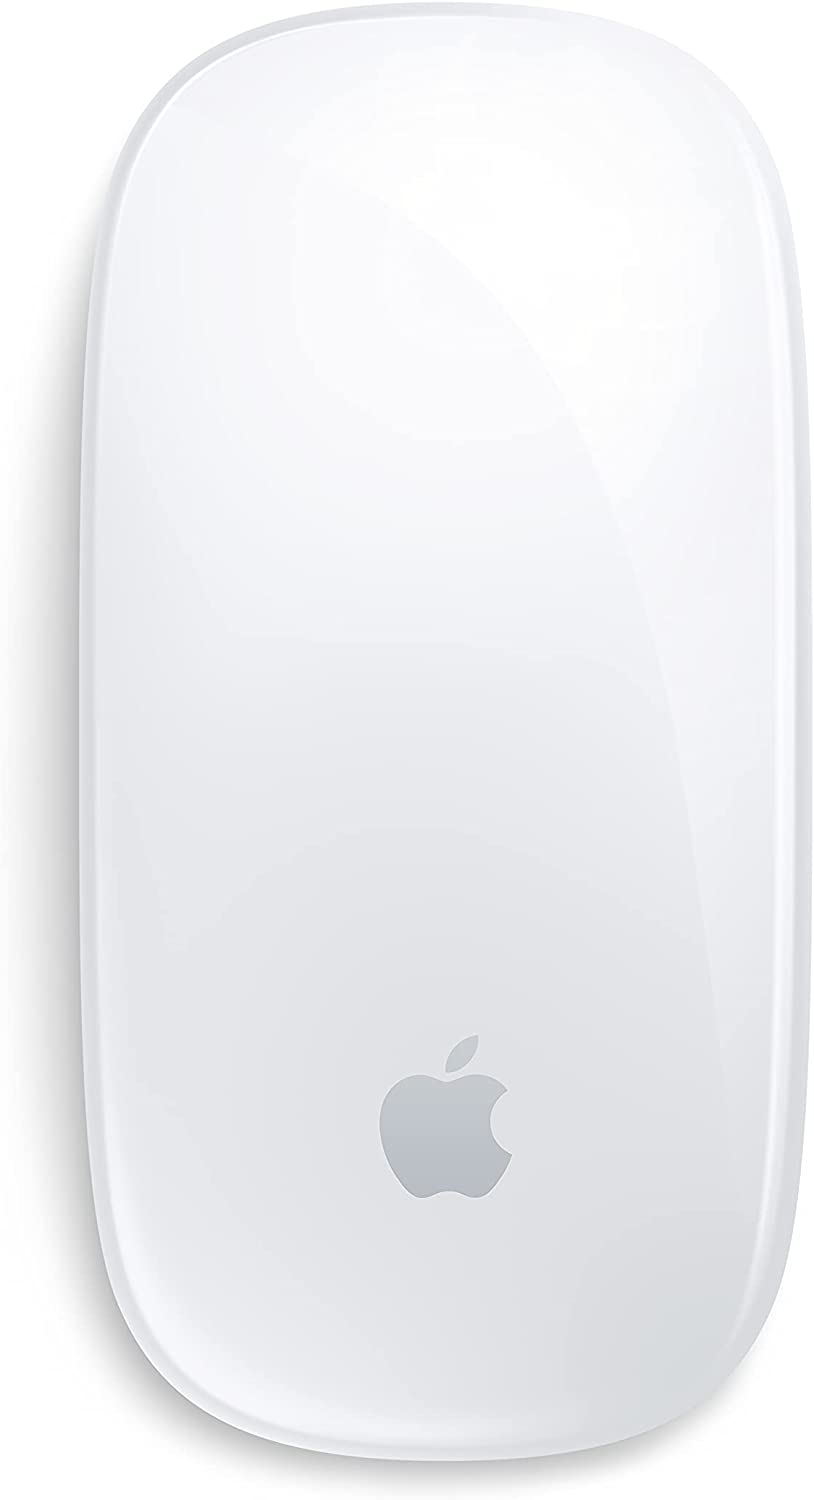 Magic Mouse 2 White Brand New Silver New - Sealed